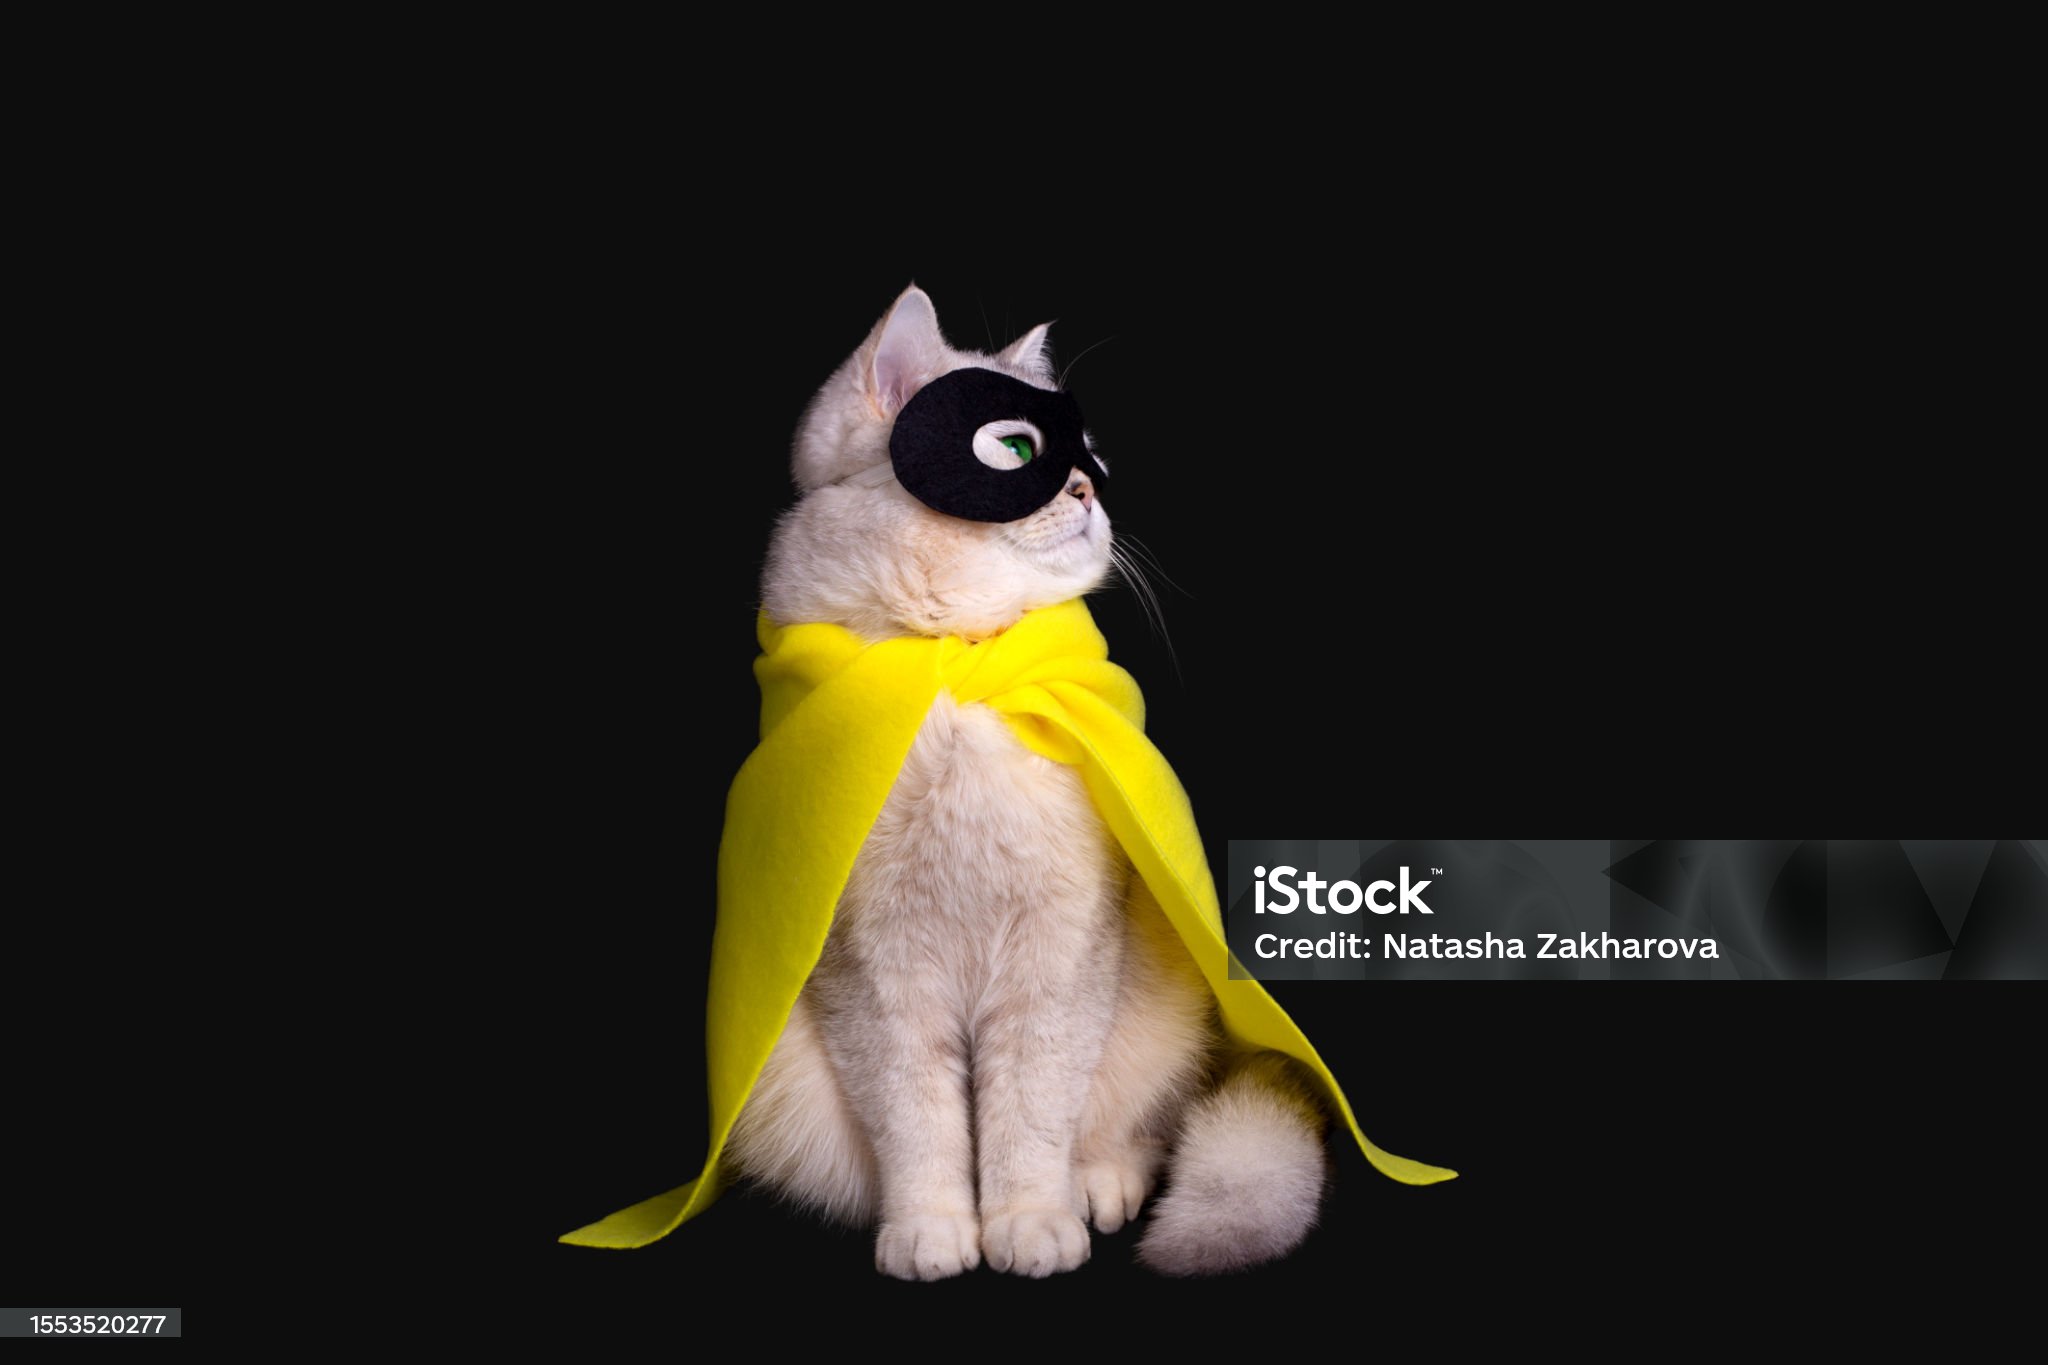 white-cat-in-a-black-mask-and-yellow-cape-sits-on-black-background-looking-away.jpg